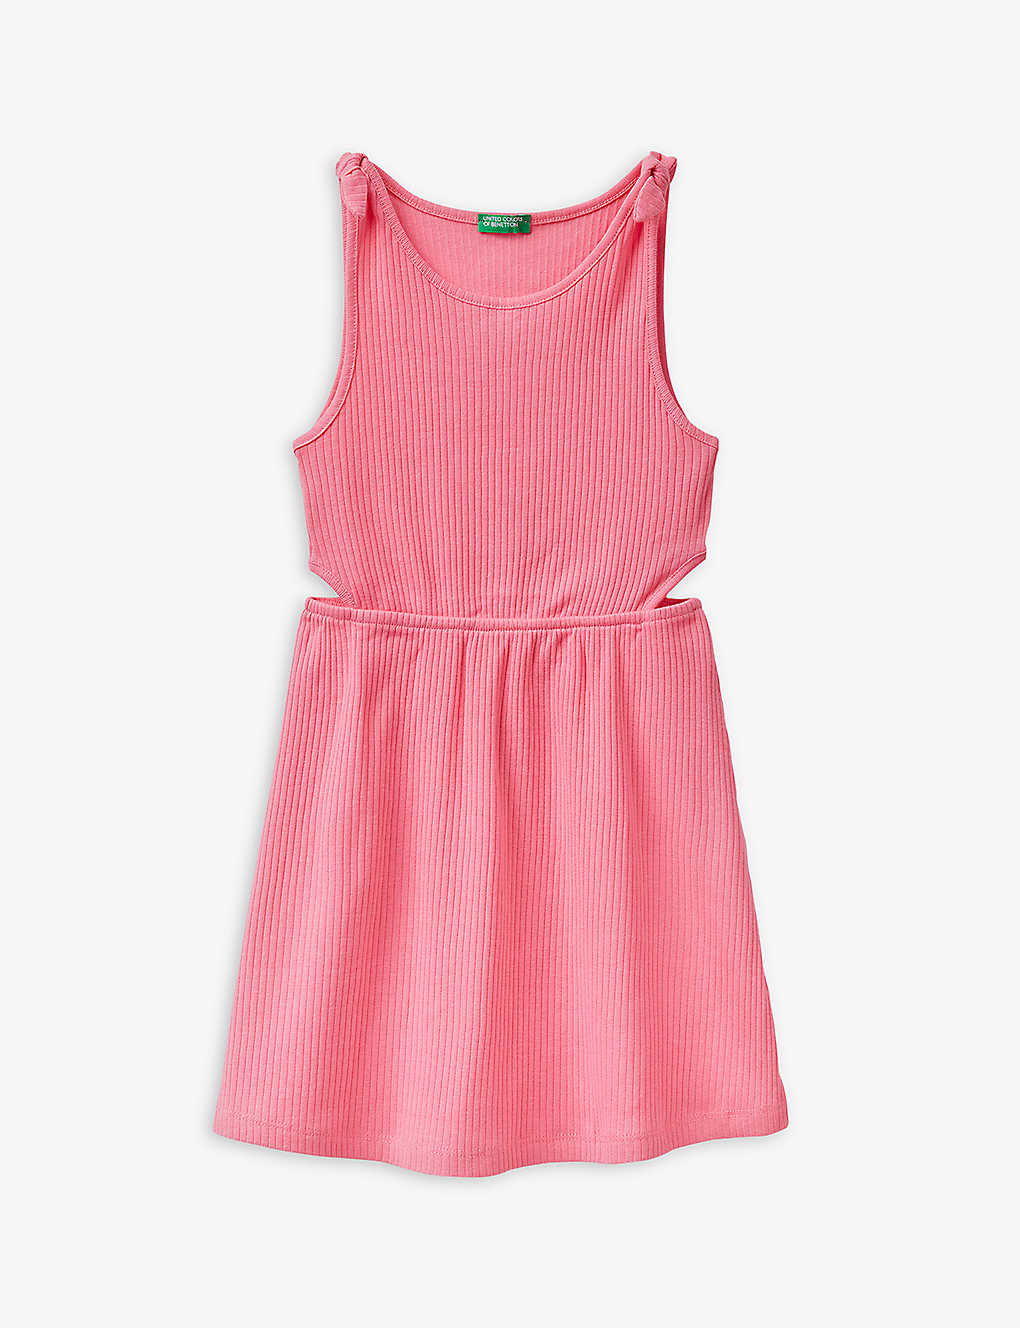 Benetton Girls Bright Pink Kids Cut-out Ribbed Cotton-jersey Dress 6-14 Years